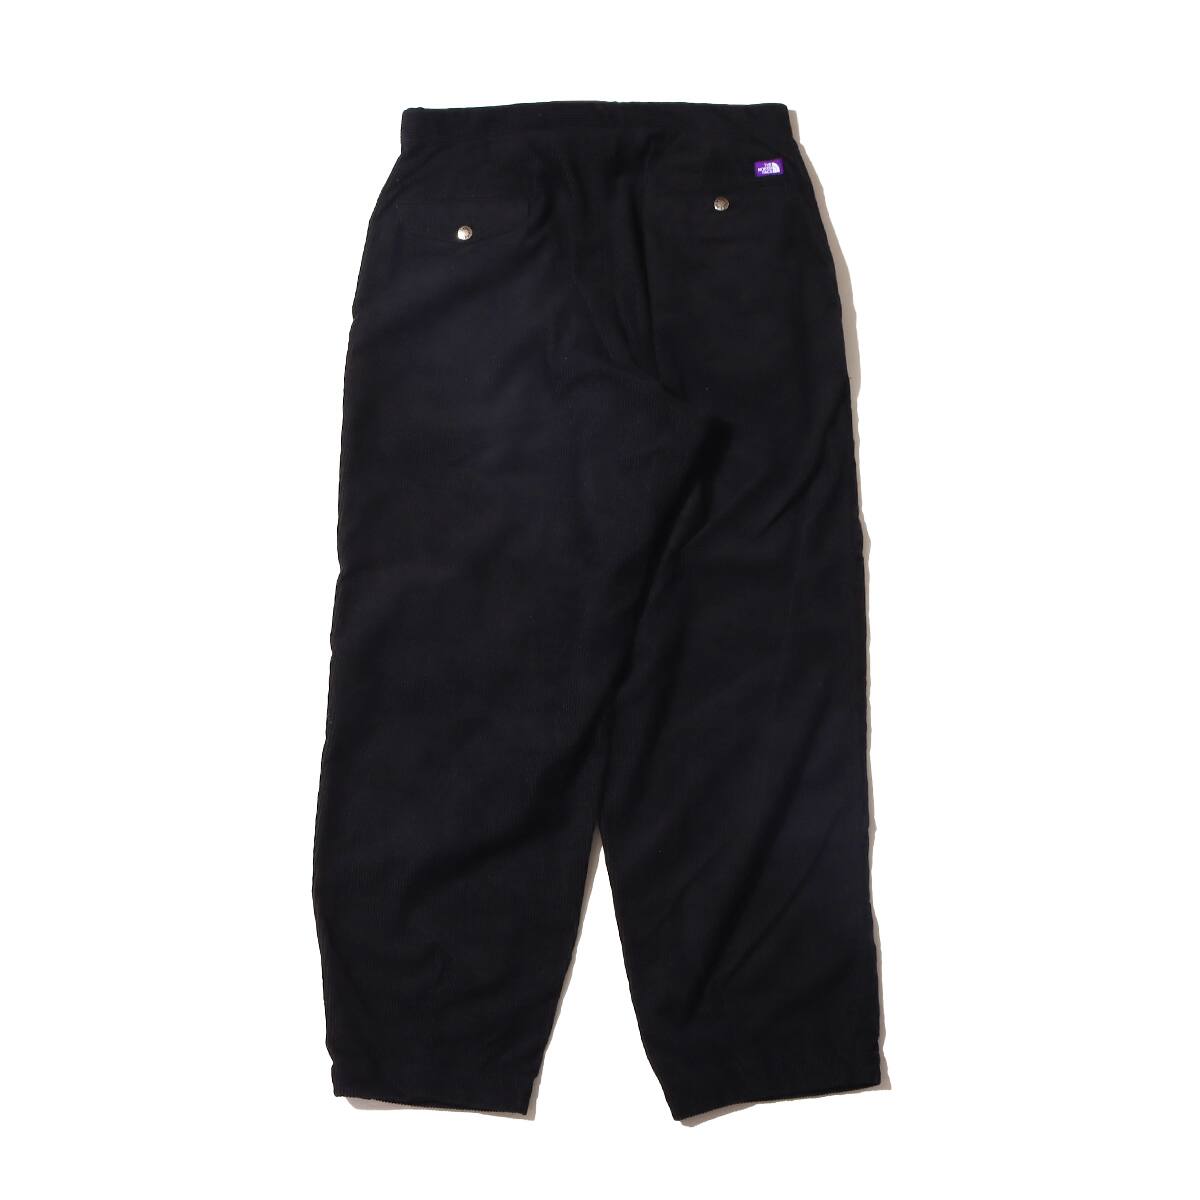 THE NORTH FACE PURPLE LABEL Corduroy Wide Tapered Pants Black 22FW-I